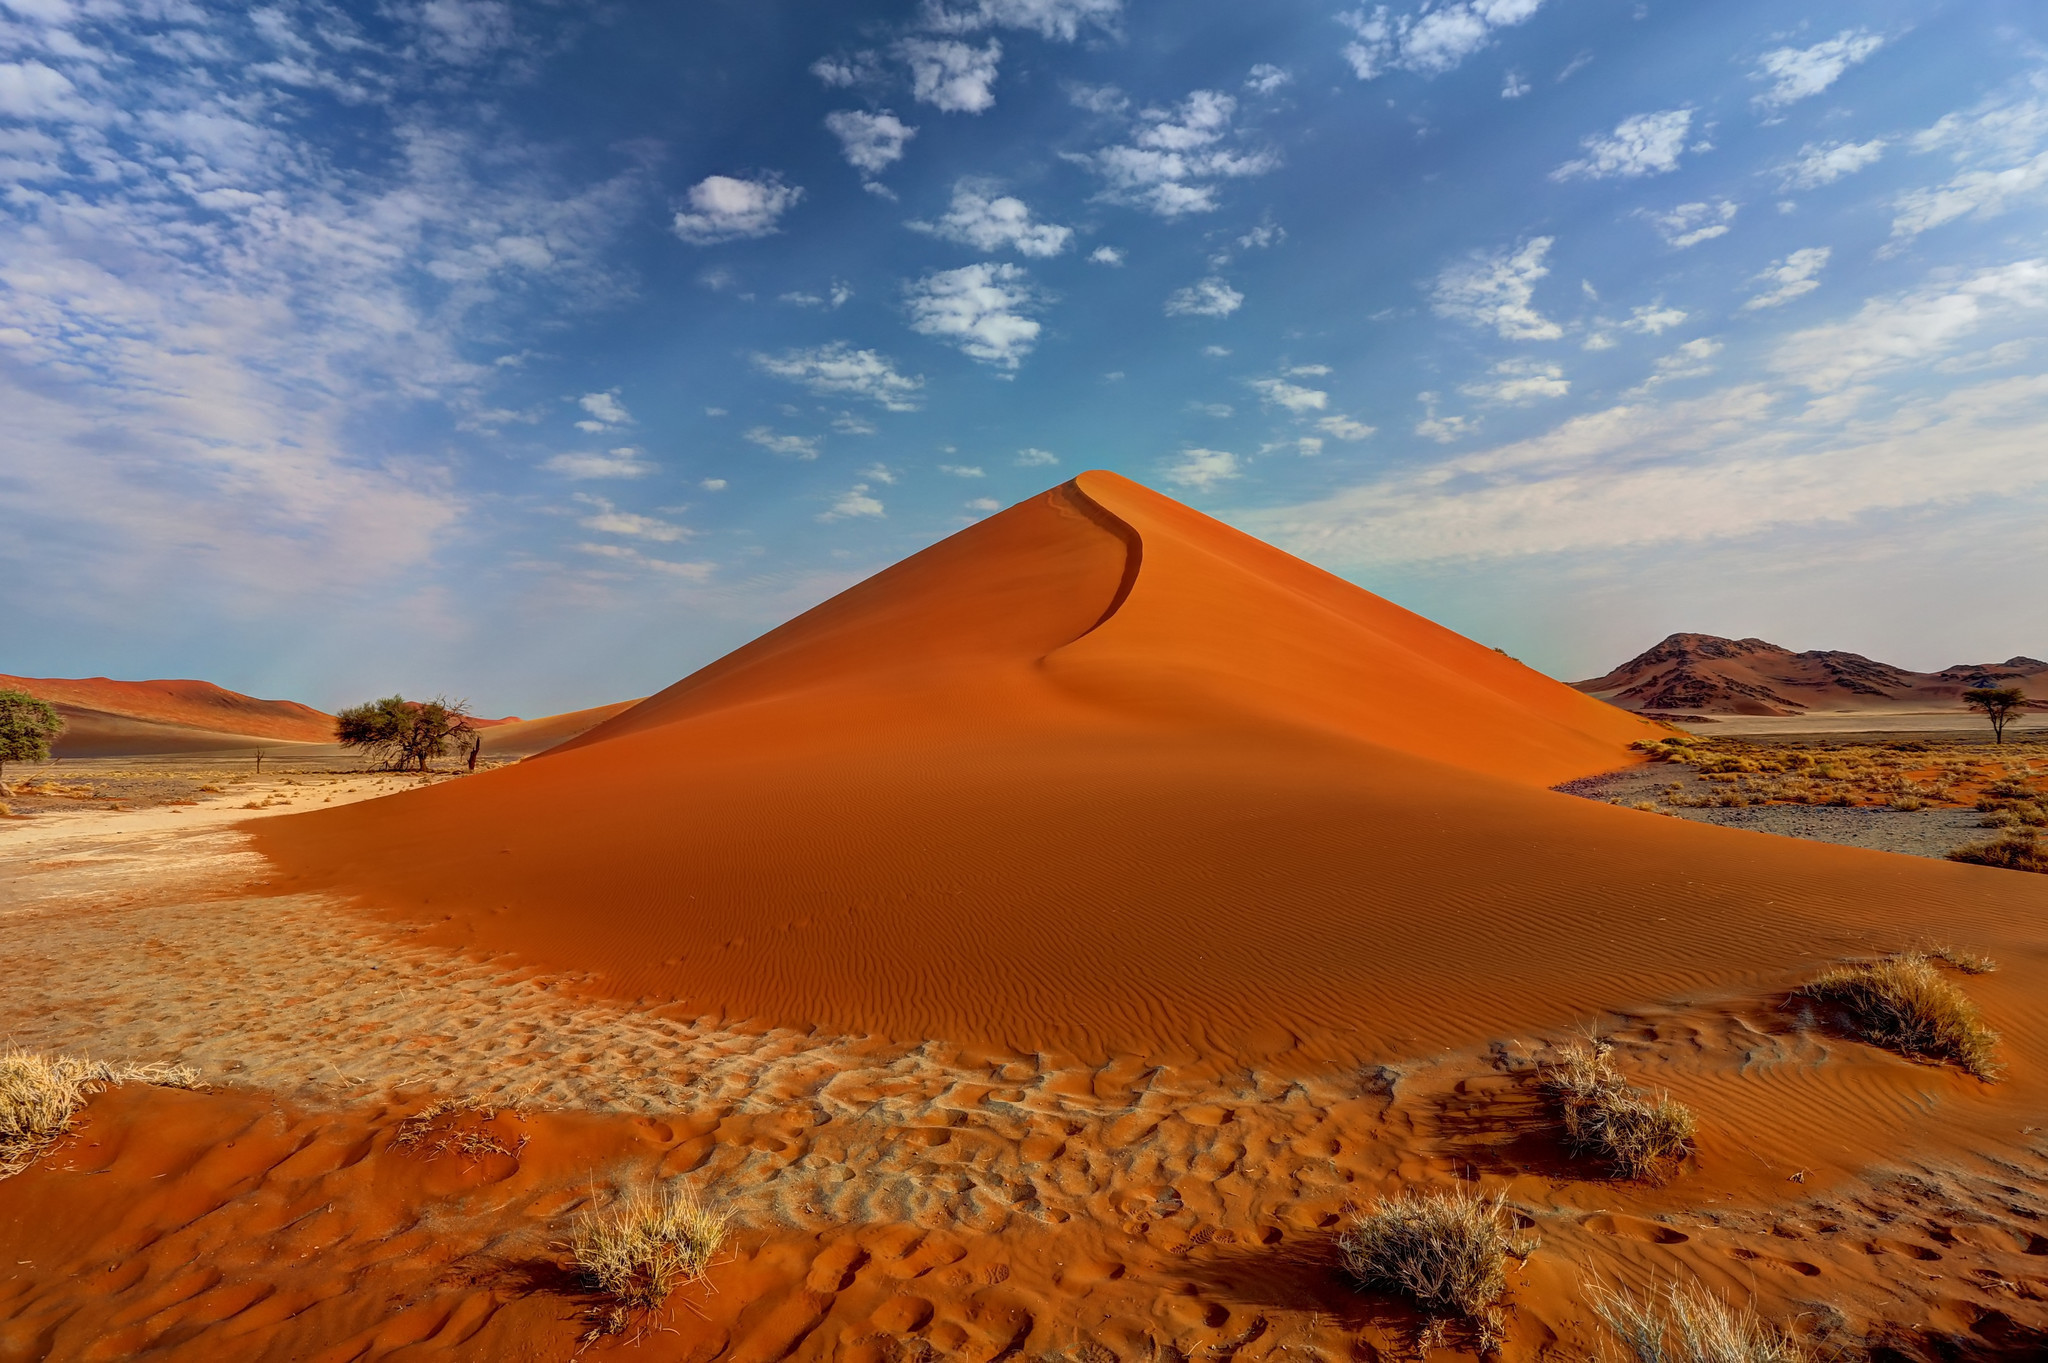 It's Namibia's purity, its untouched qualities, that compel people to ...